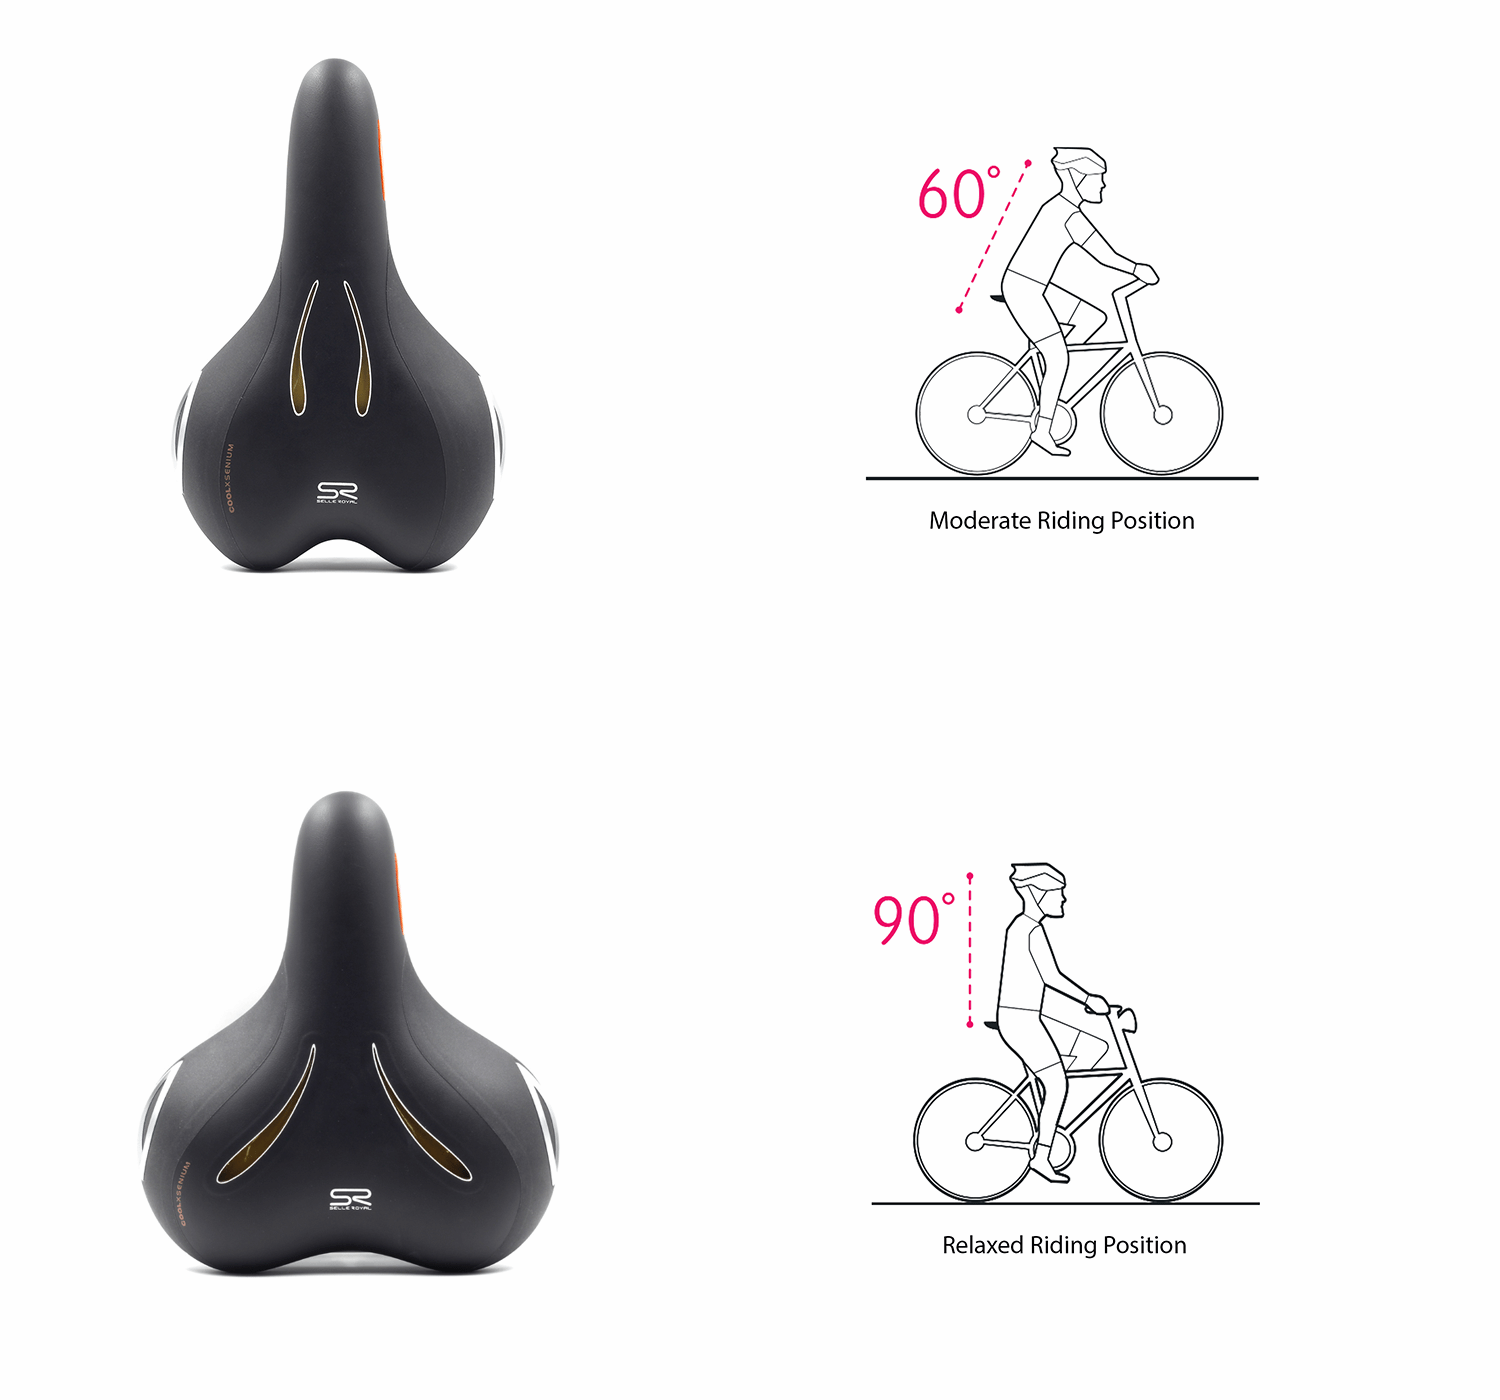 Selle Royal Lookin Moderate/Relaxed Position Saddle